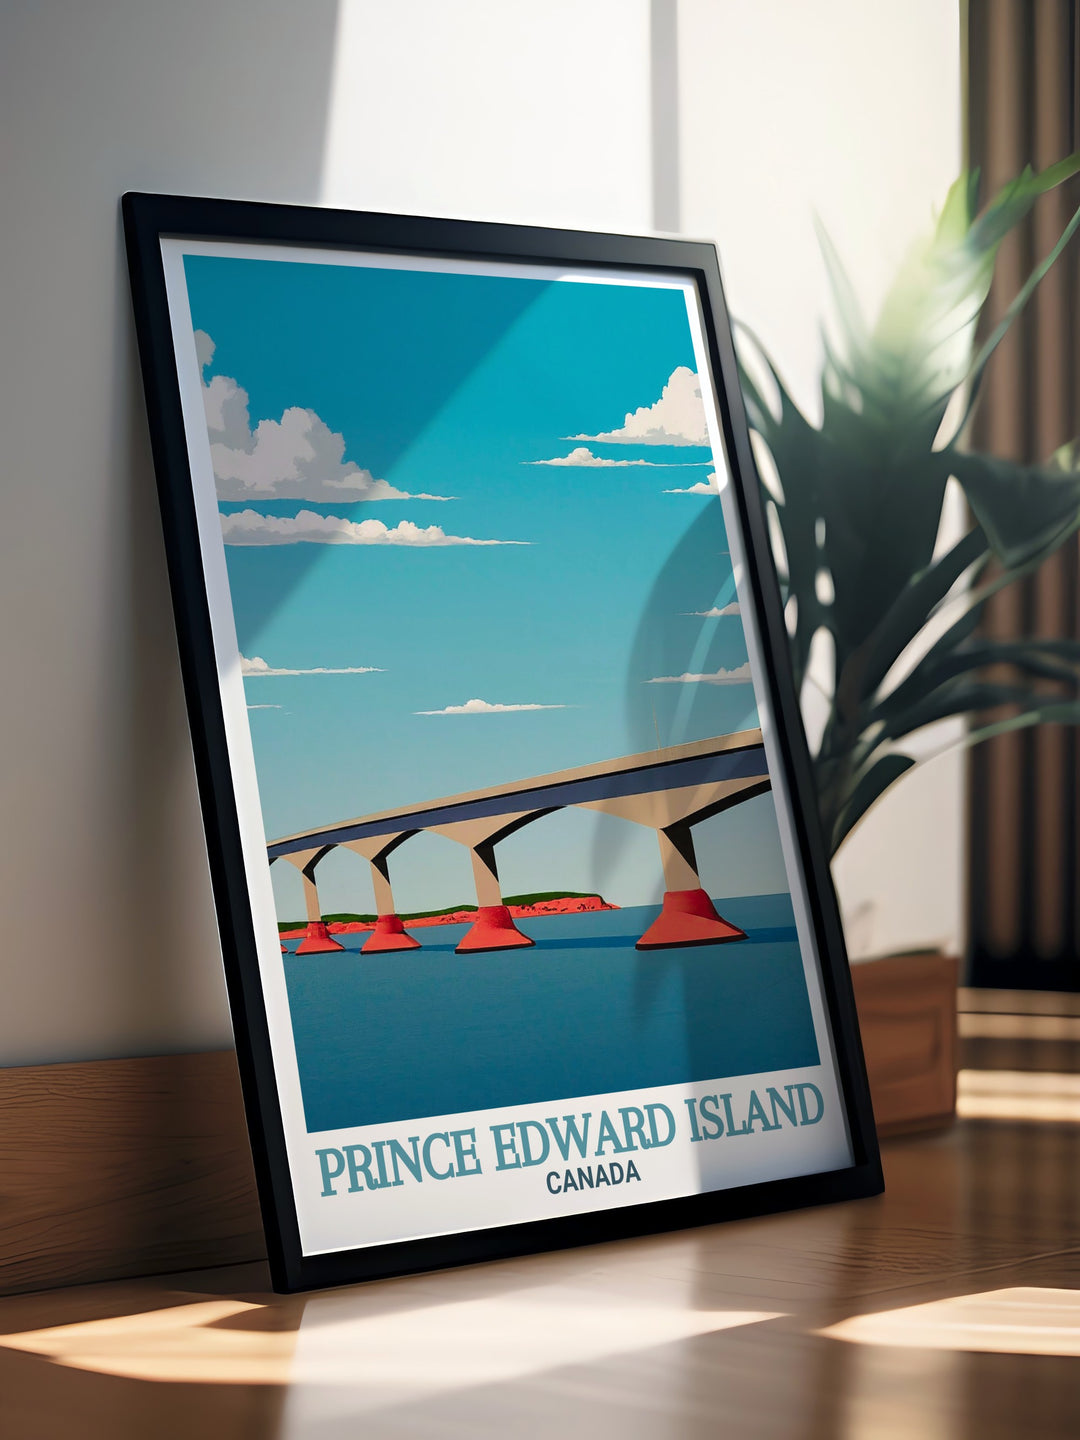 Confederation Bridge stunning prints capturing the breathtaking beauty of the bridge and the surrounding waters perfect for enhancing your home decor with a touch of sophistication and charm these prints are also great for thoughtful gifts.